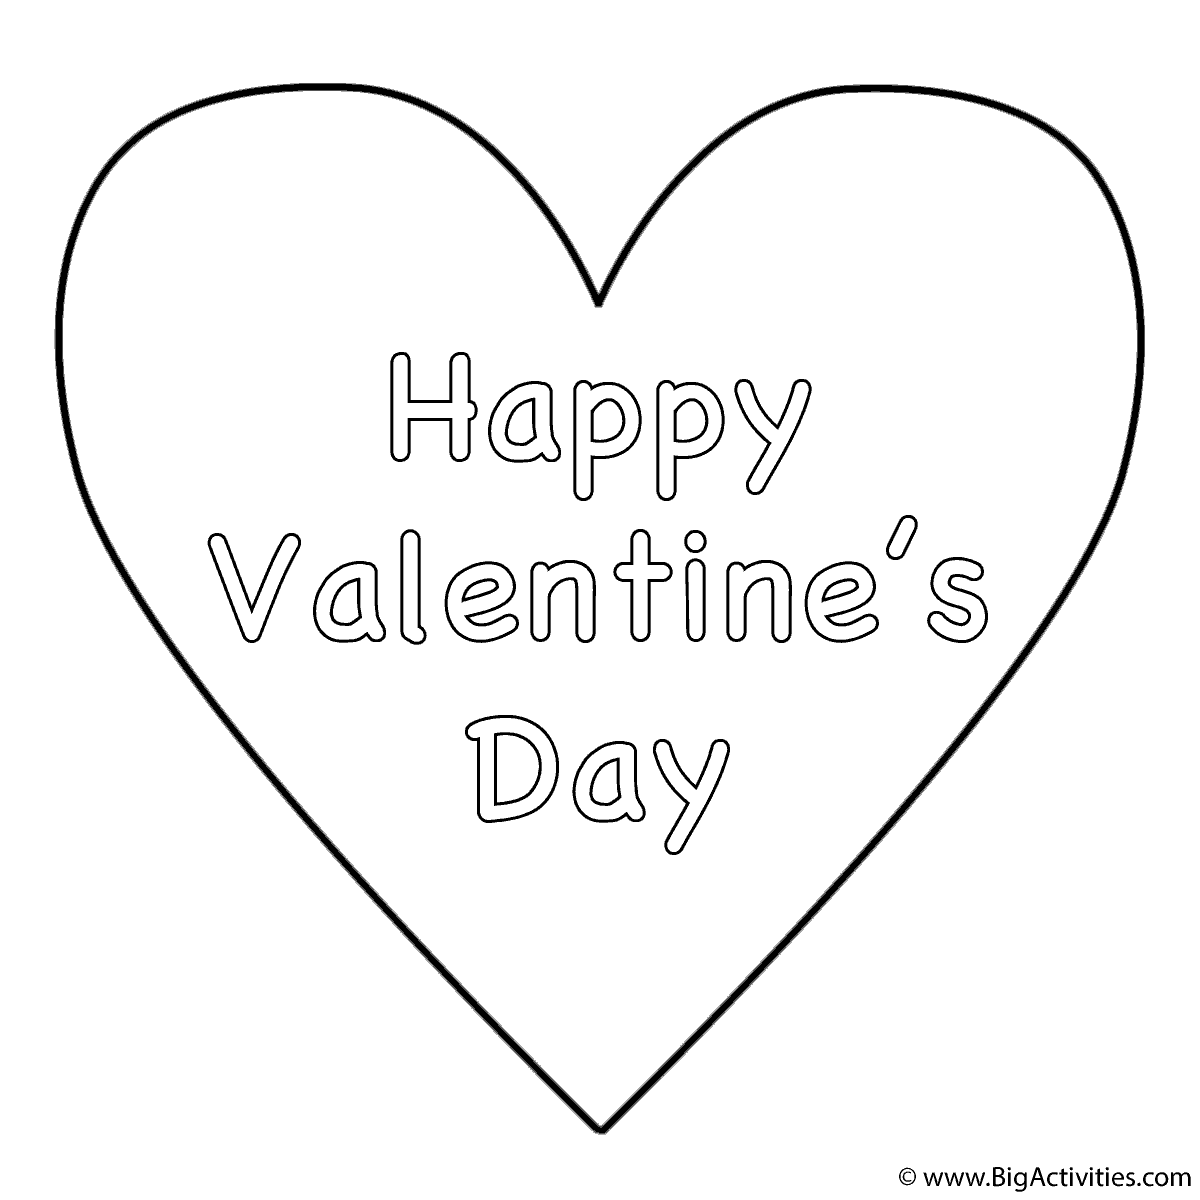 Simple Heart (Happy Valentine's Day) - Coloring Page (Valentine's Day)